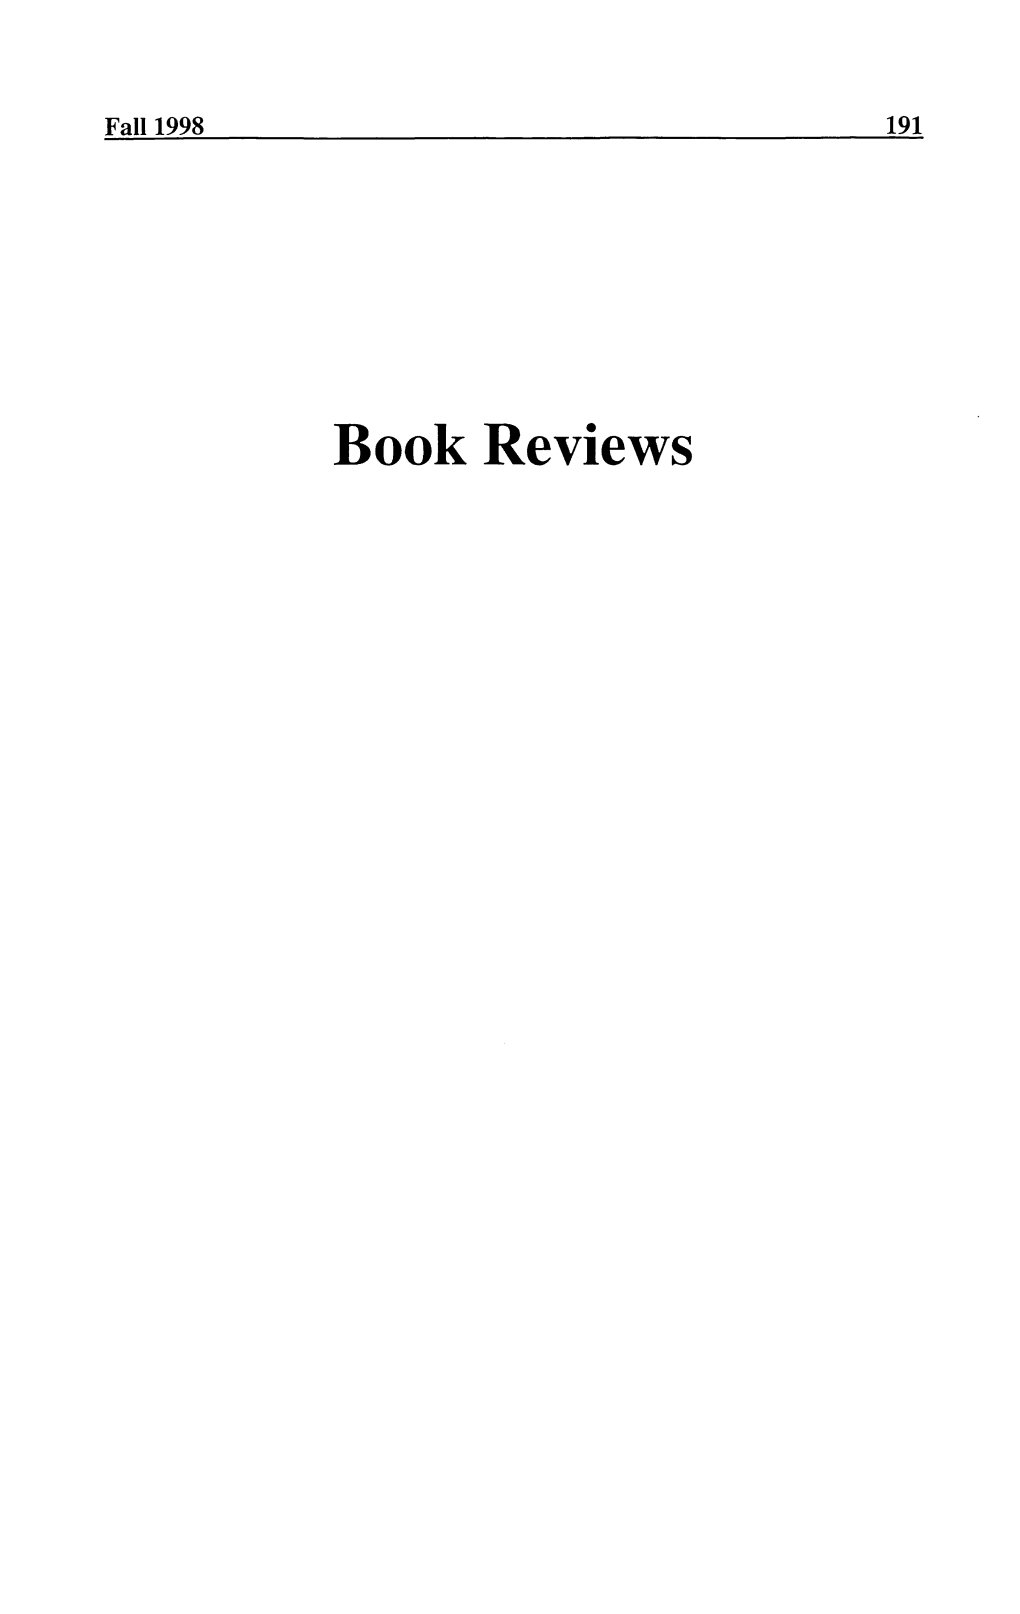 Book Reviews 192 Journal of Dramatic Theory and Criticism Fall 1998 193